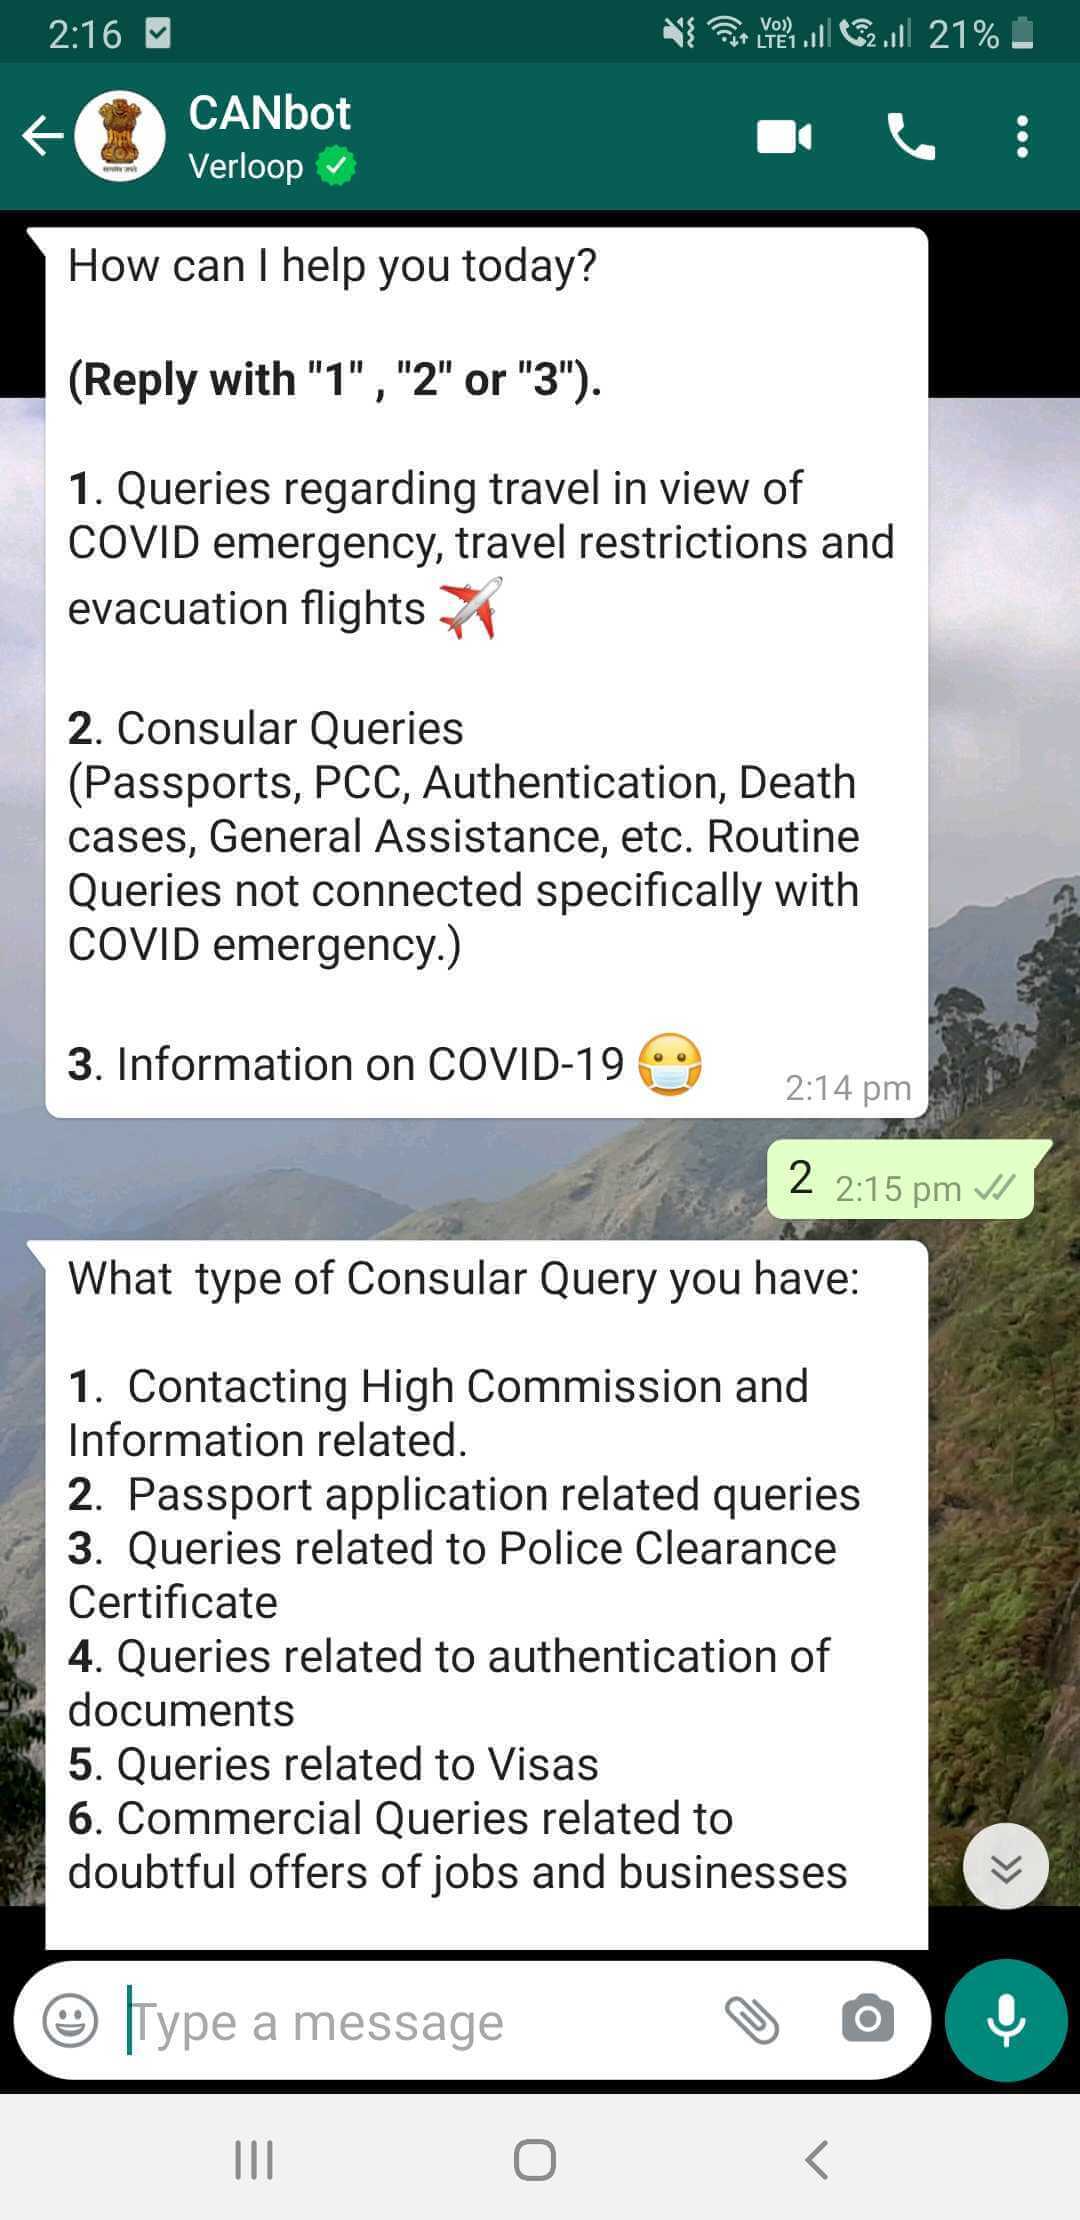 covid-19 bot : CANbot, whatsapp version